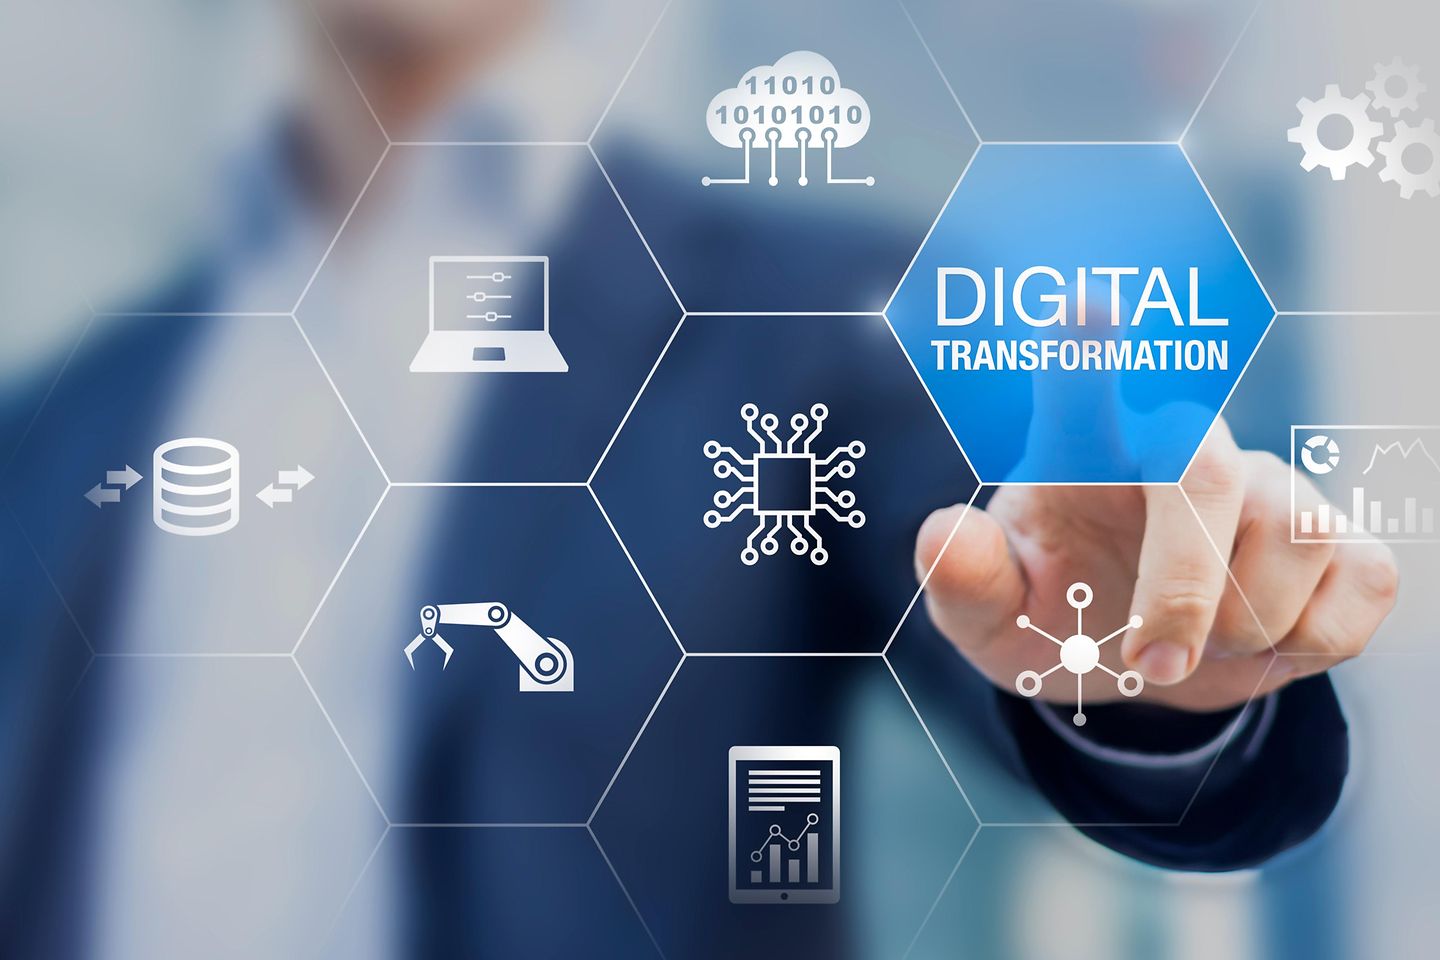 A human finger points to the word "digital transformation" on a digital image.